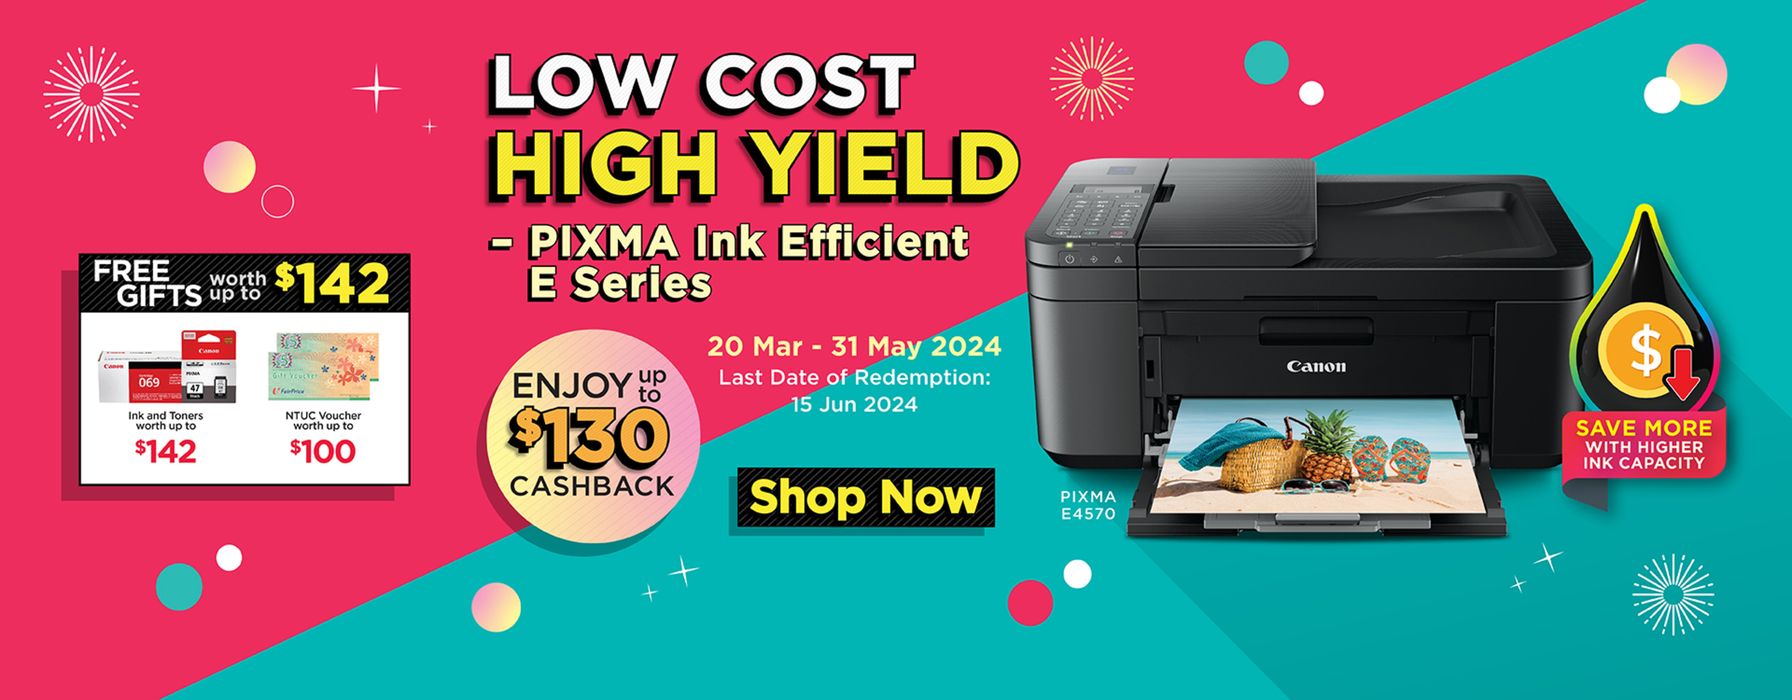 Canon catalogue | Low cost - high yield | 17/04/2024 - 31/05/2024